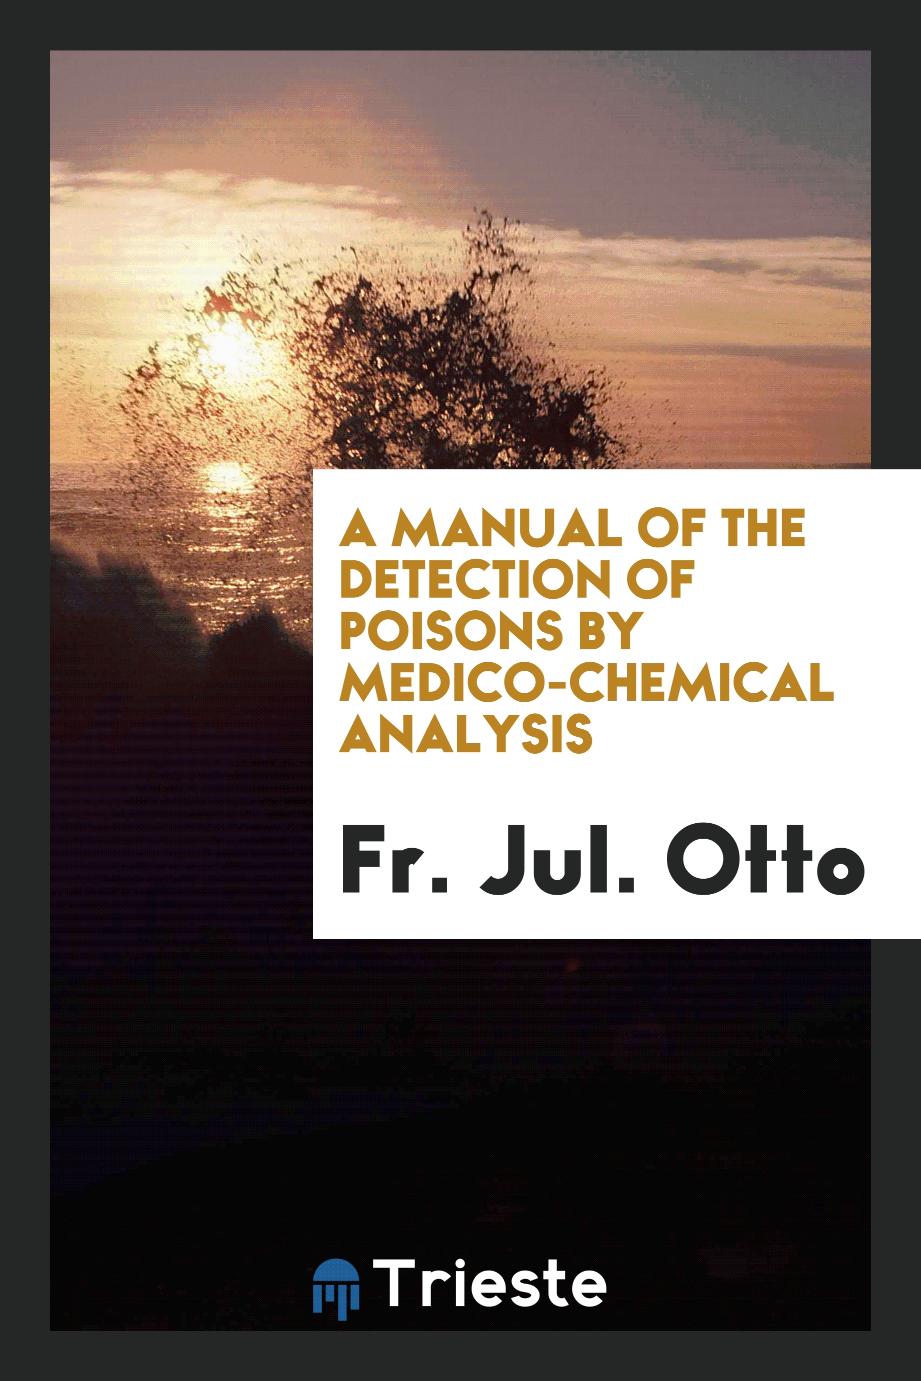 A manual of the detection of poisons by medico-chemical analysis